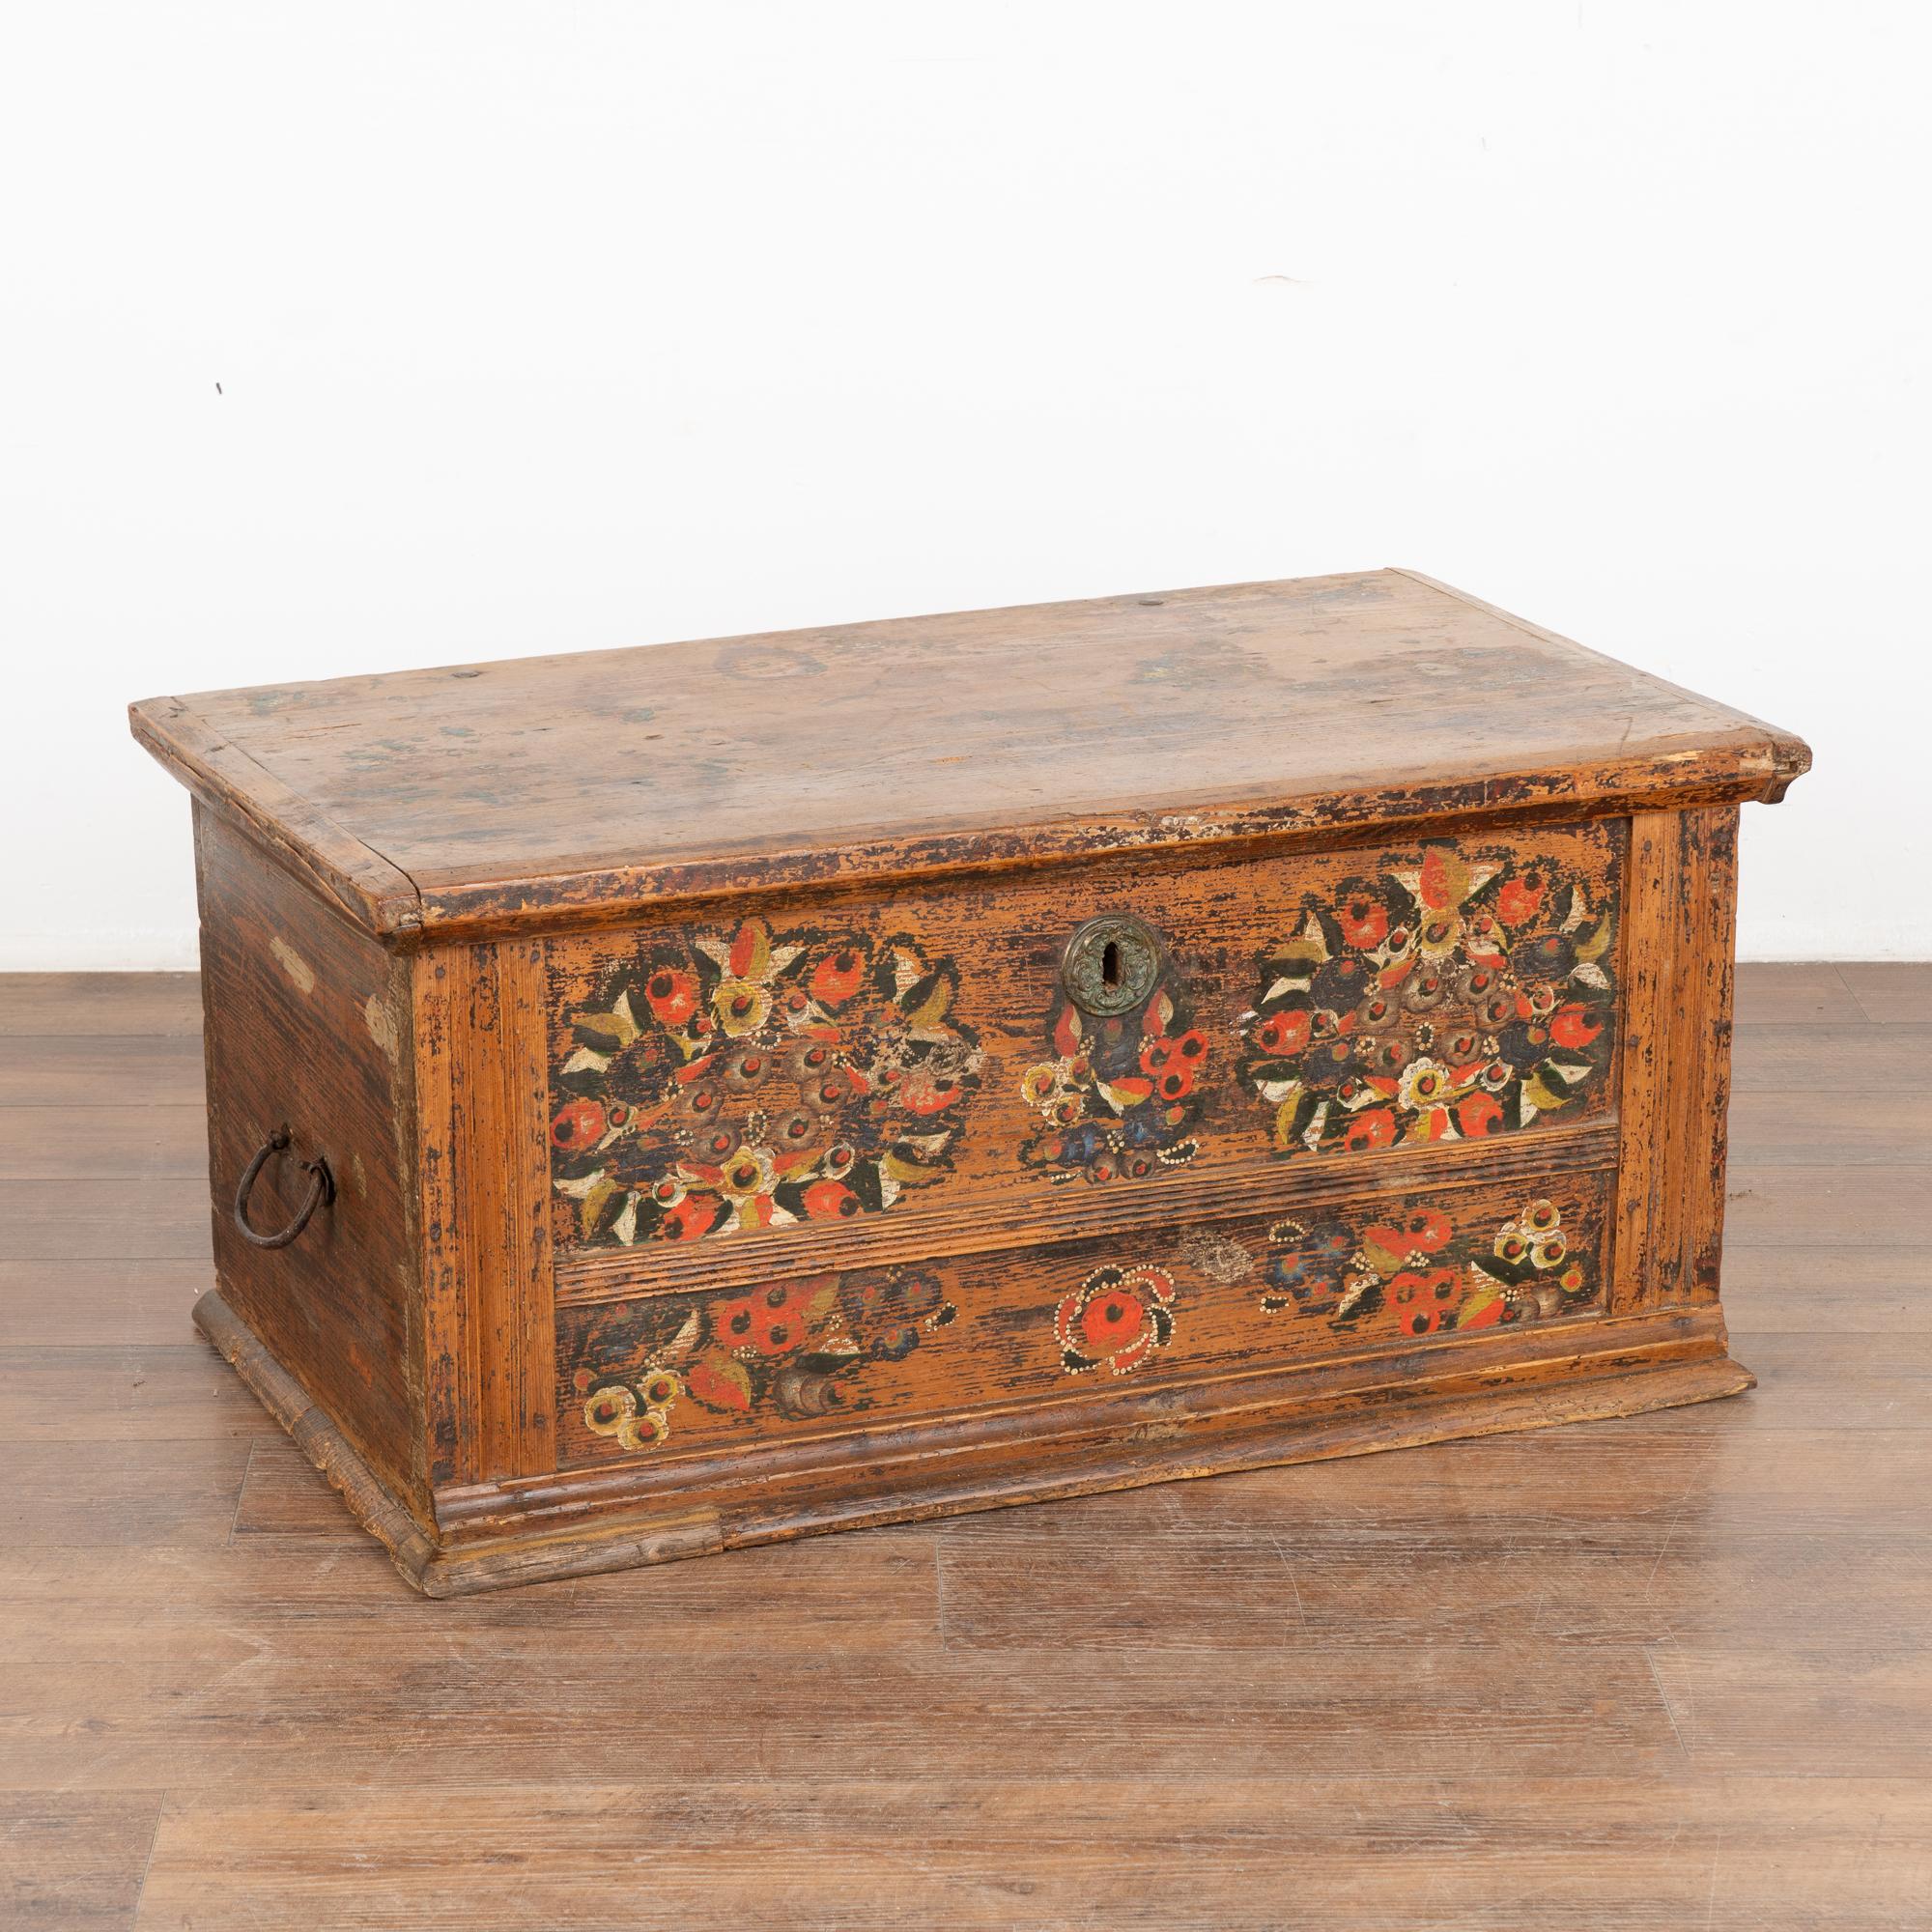 Original hand-painted folk art flat top pine trunk.
Original traditional floral motif painted in brown, orange/reds, brown/black, yellow, white and black.
Restored and waxed, in solid condition ready to use. Original hand-wrought iron hinges and